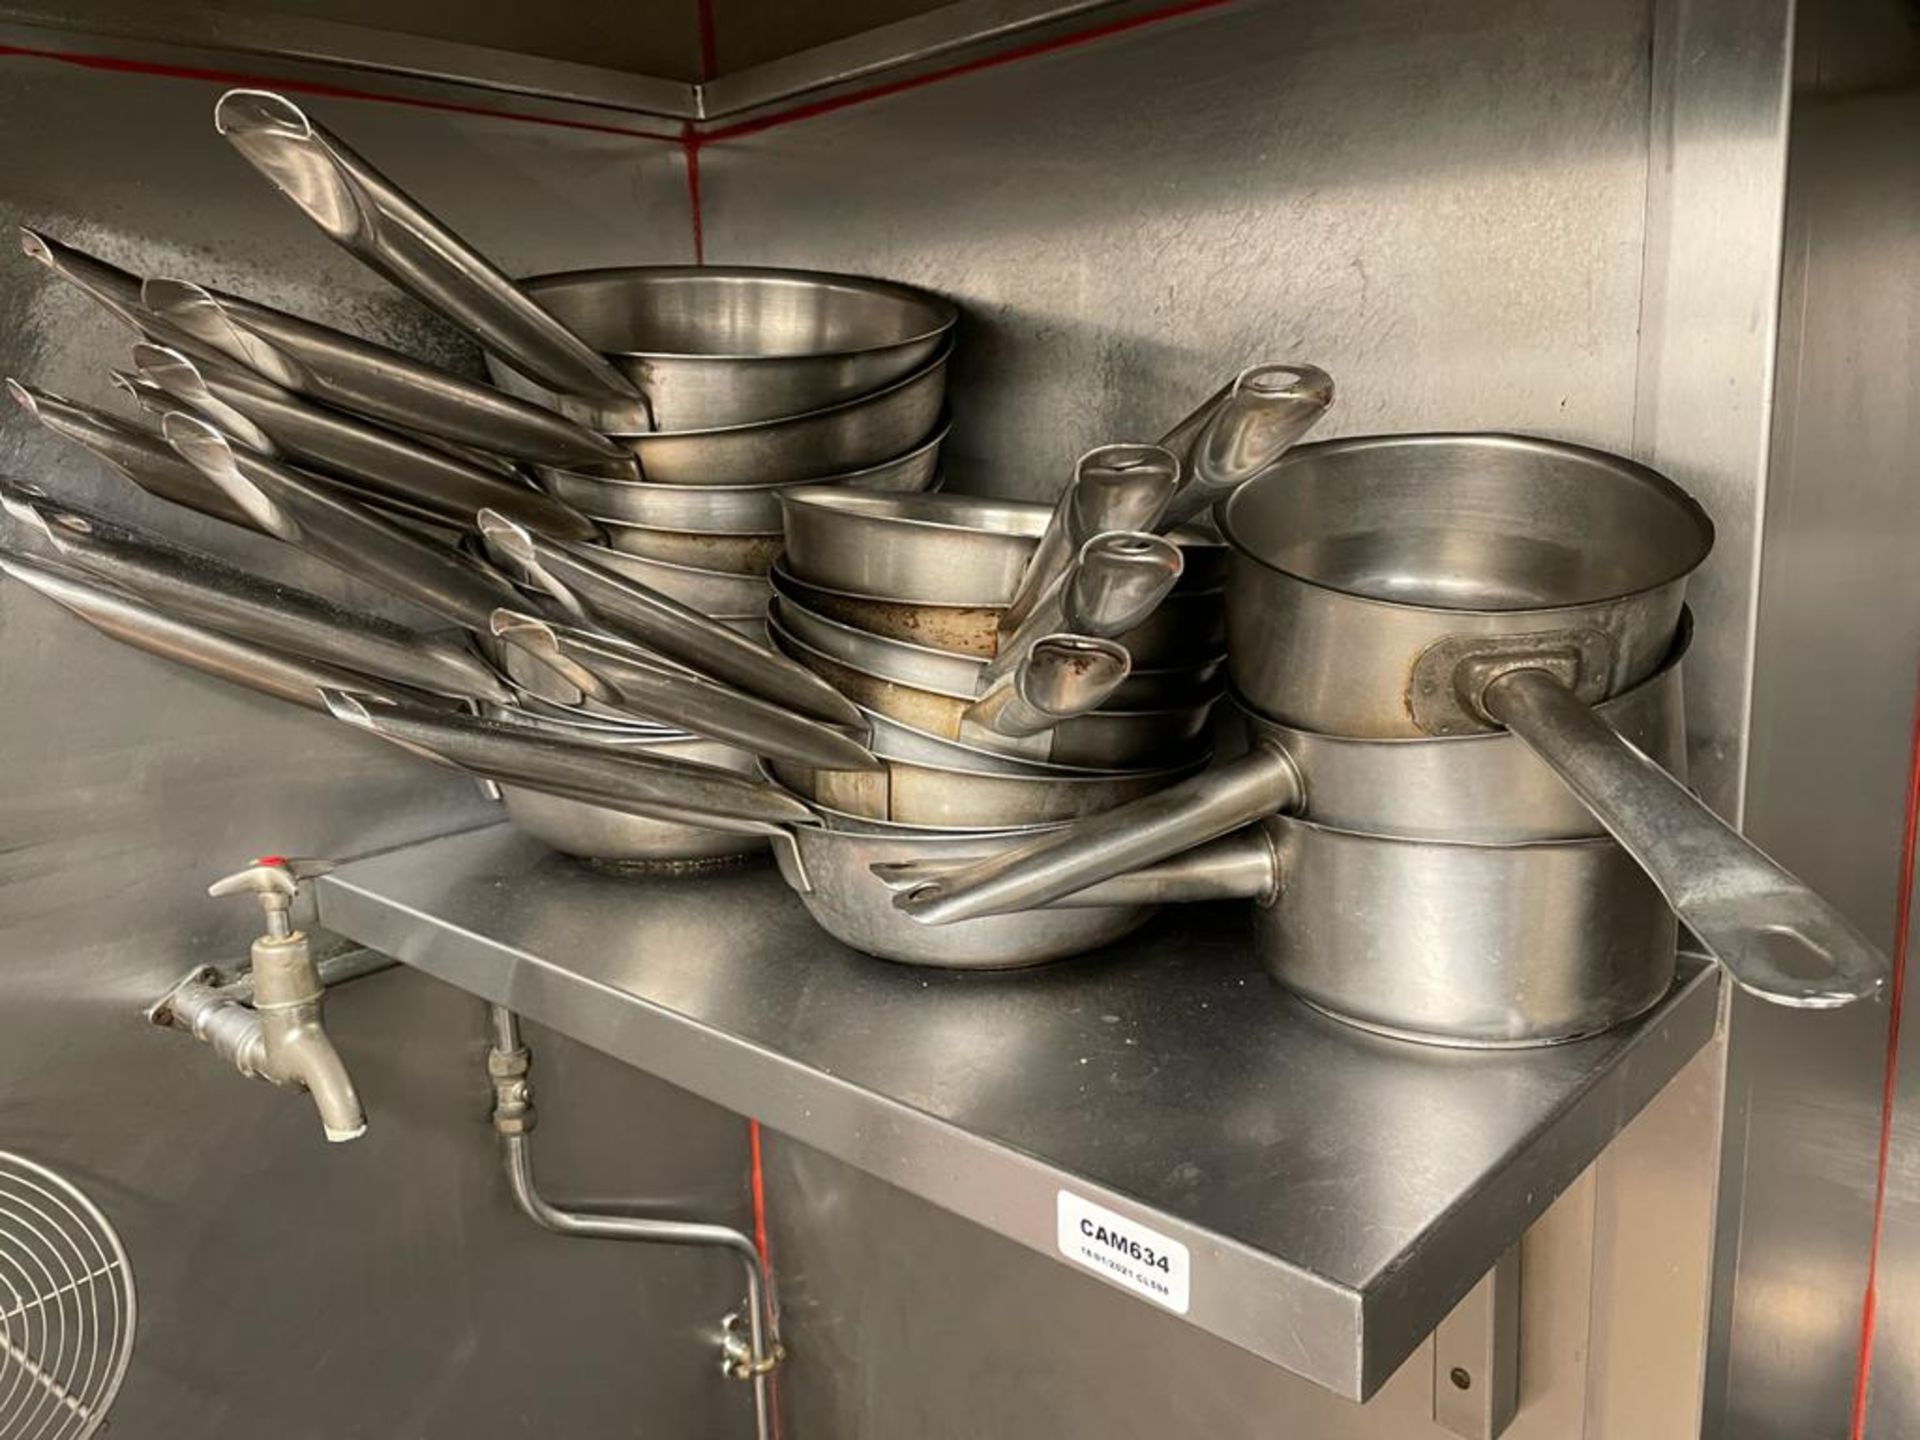 1 x Stainless Steel Shelf With 21 x Assorted Pans - Dimensions Of Shelf: 66 x 30cm - Ref: CAM634 - - Image 2 of 2